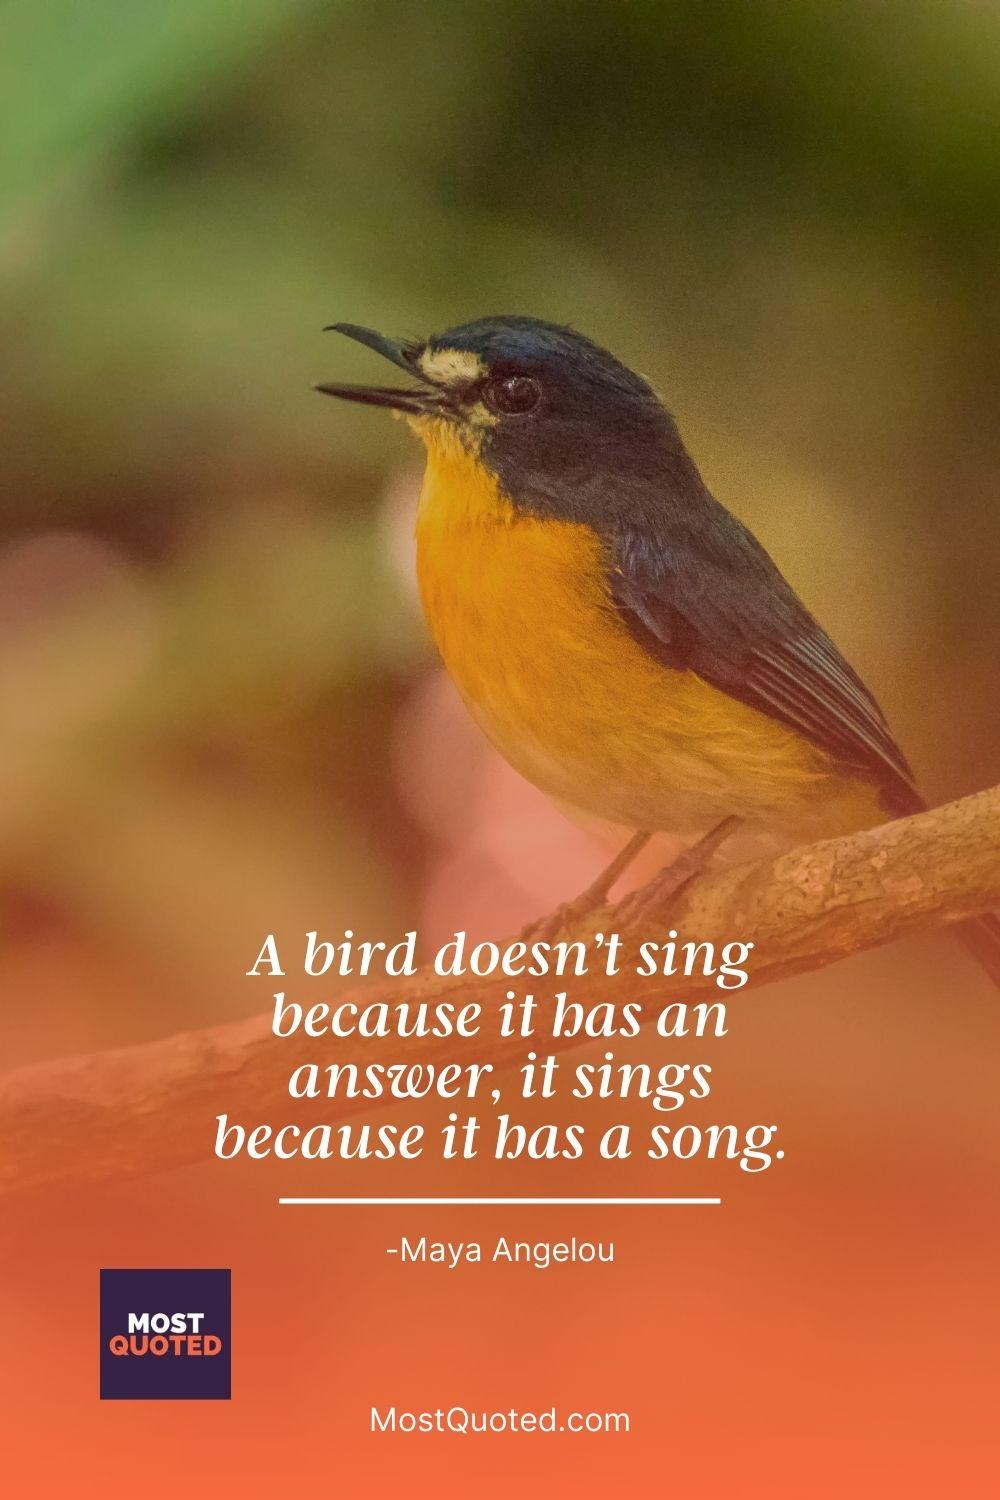 A bird doesn’t sing because it has an answer, it sings because it has a song. - Maya Angelou